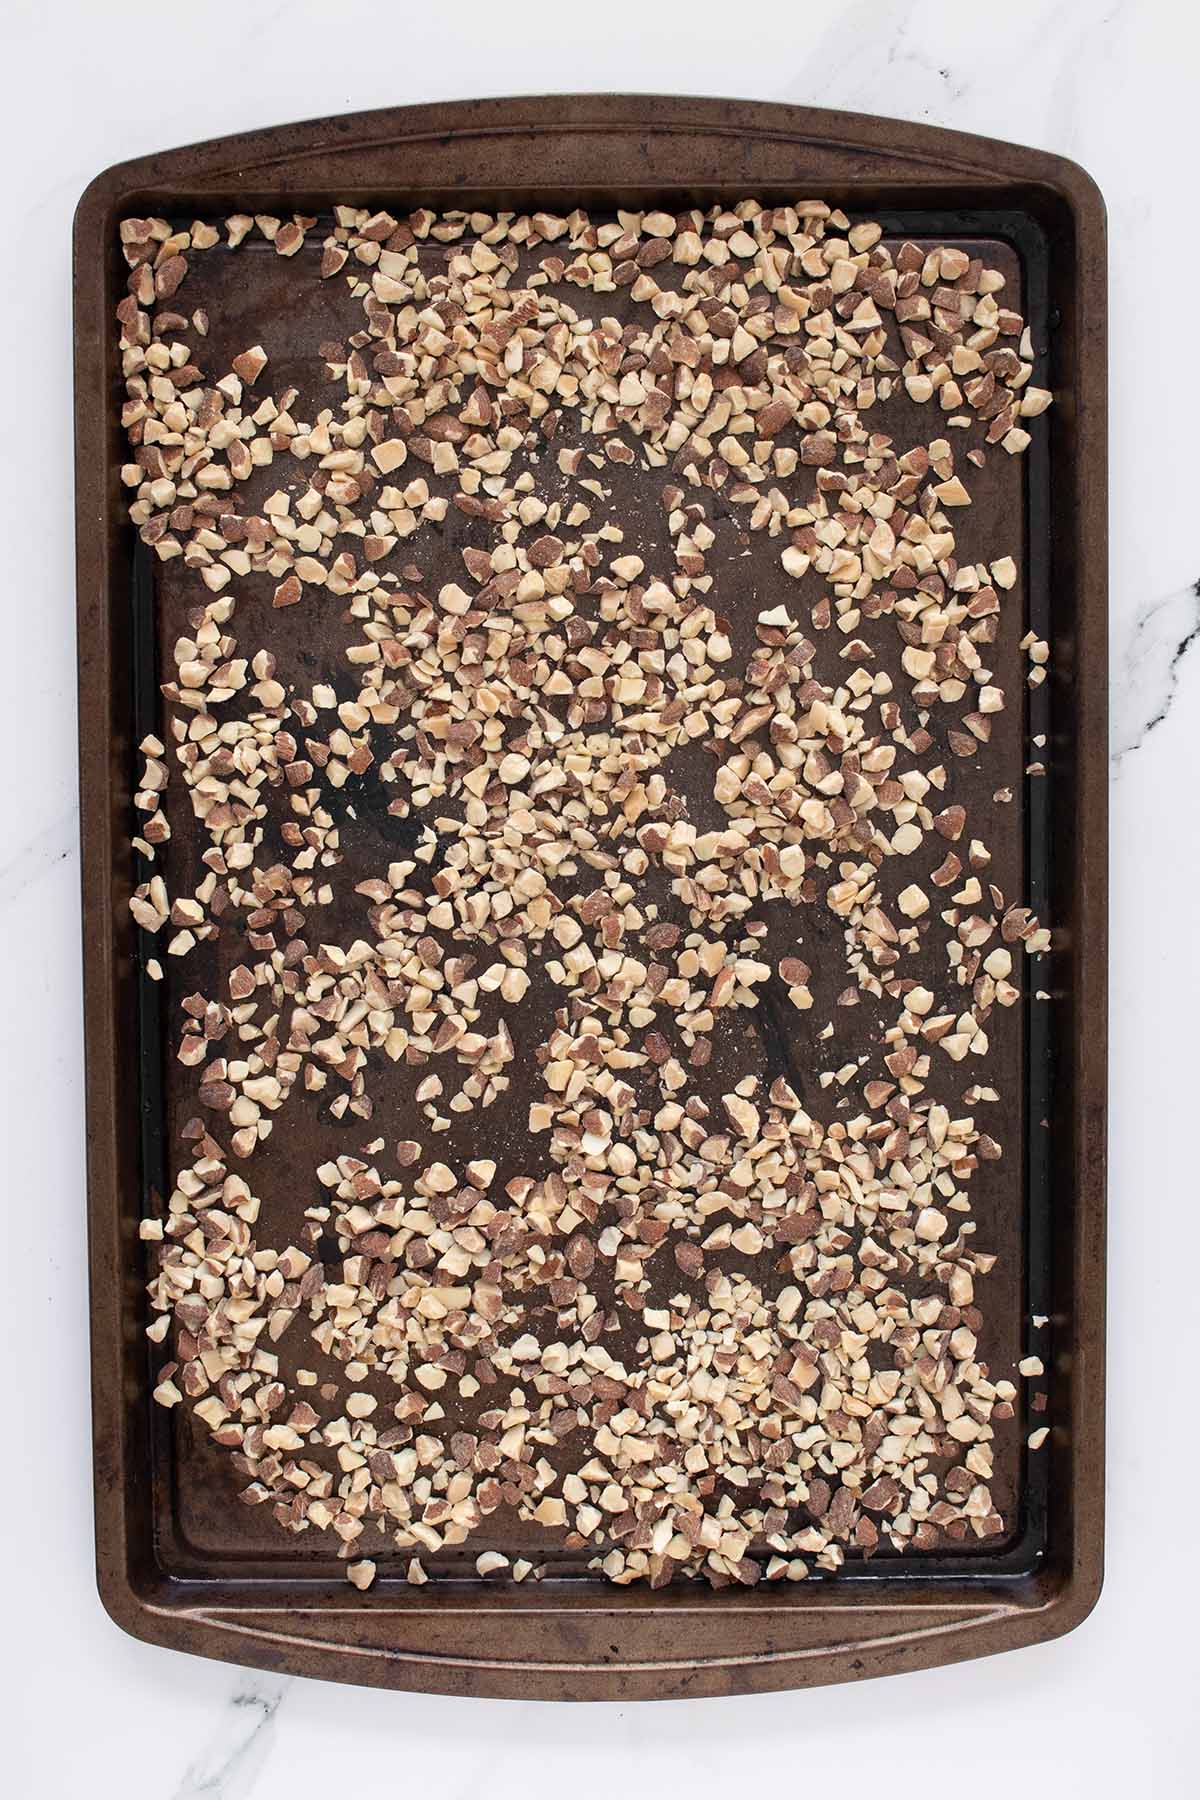 Overhead view of chopped almonds on a baking sheet